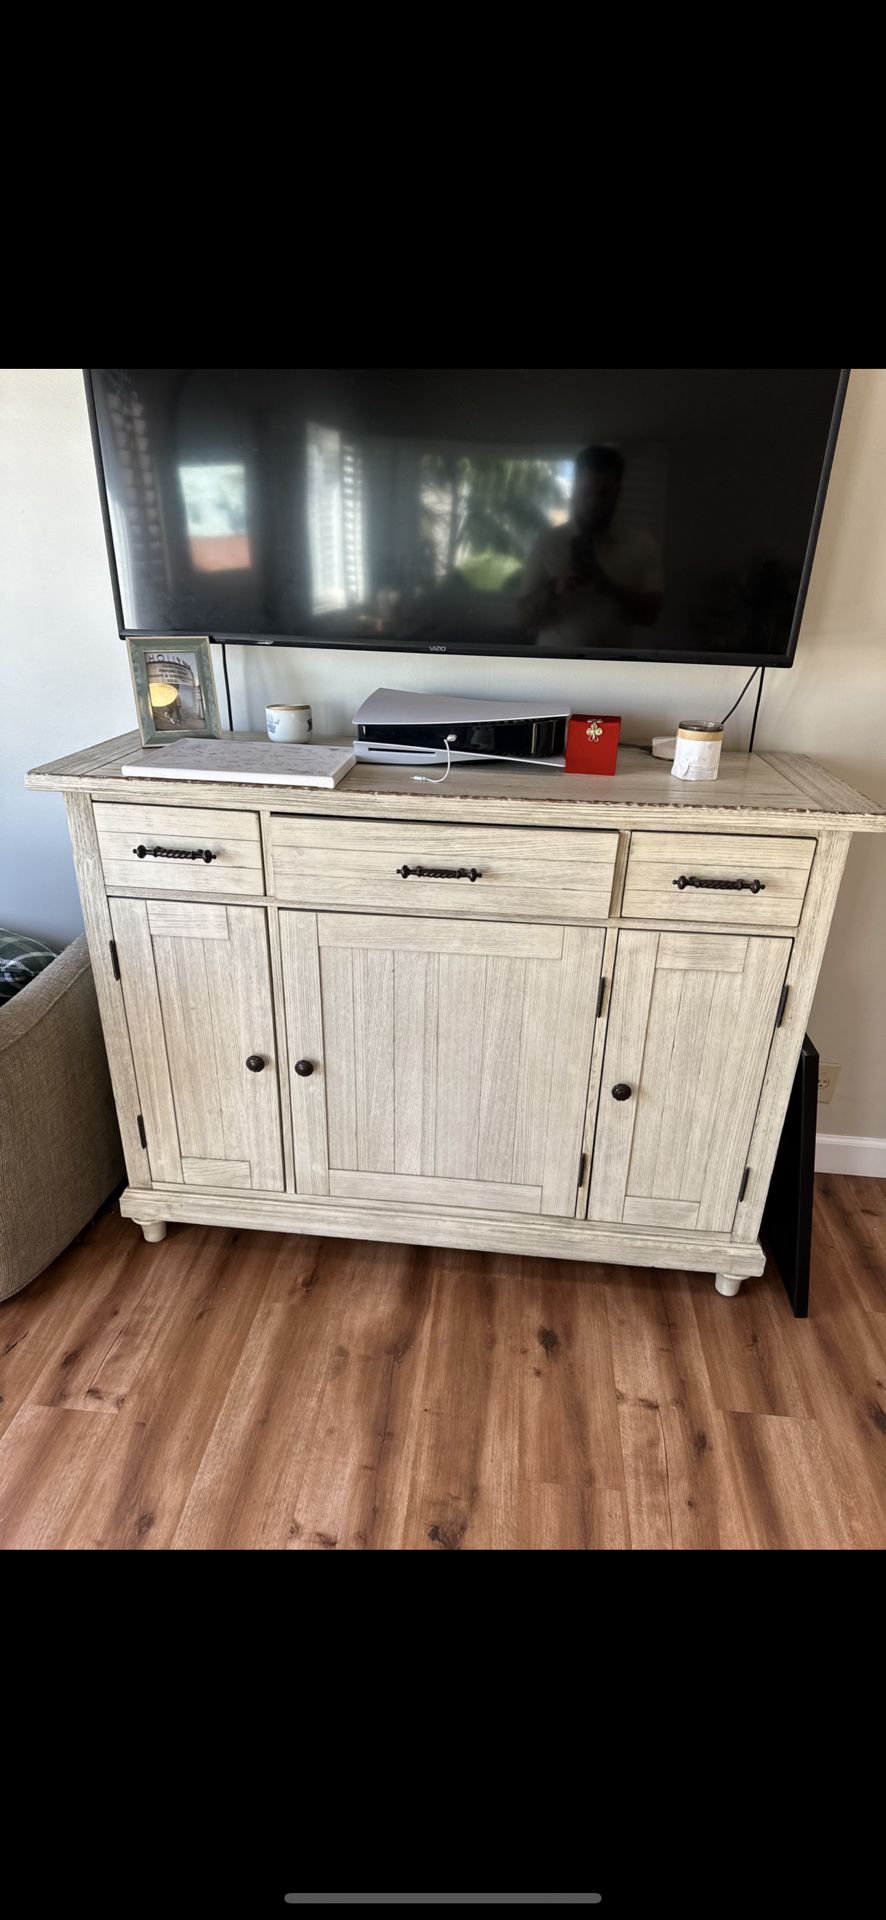 Great Entertainment Center With Tons Of Storage!